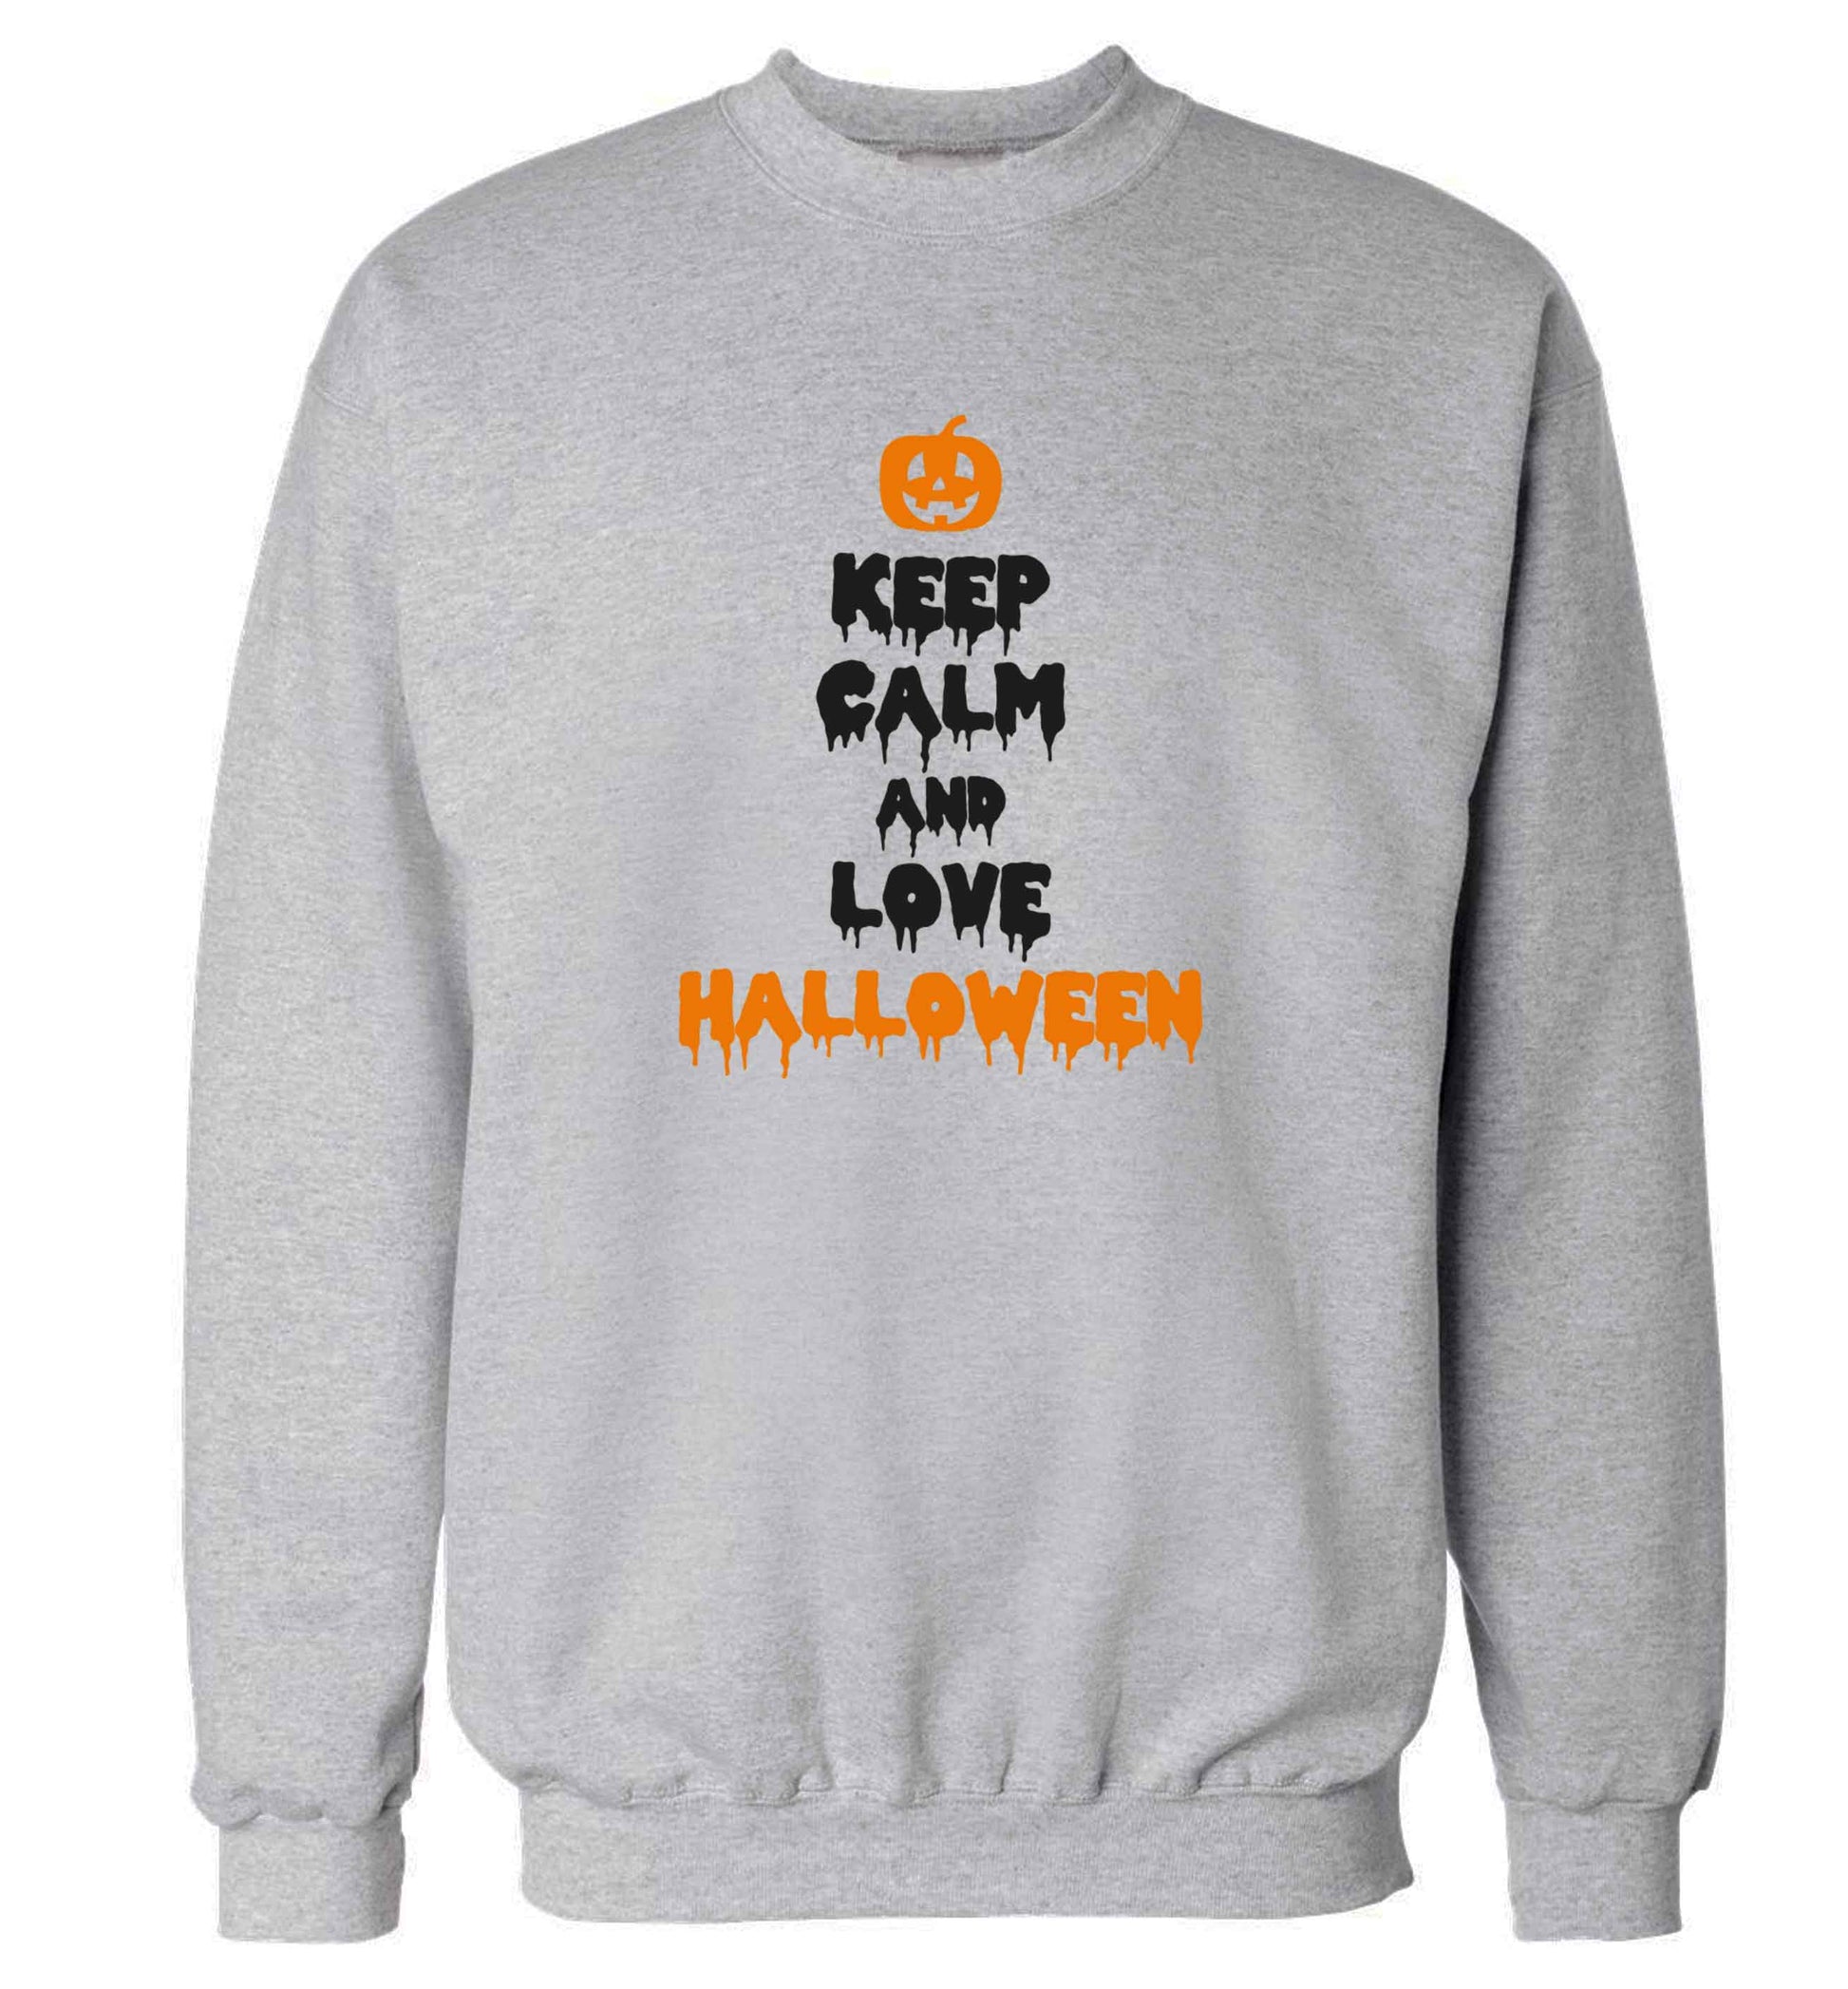 Keep calm and love halloween adult's unisex grey sweater 2XL